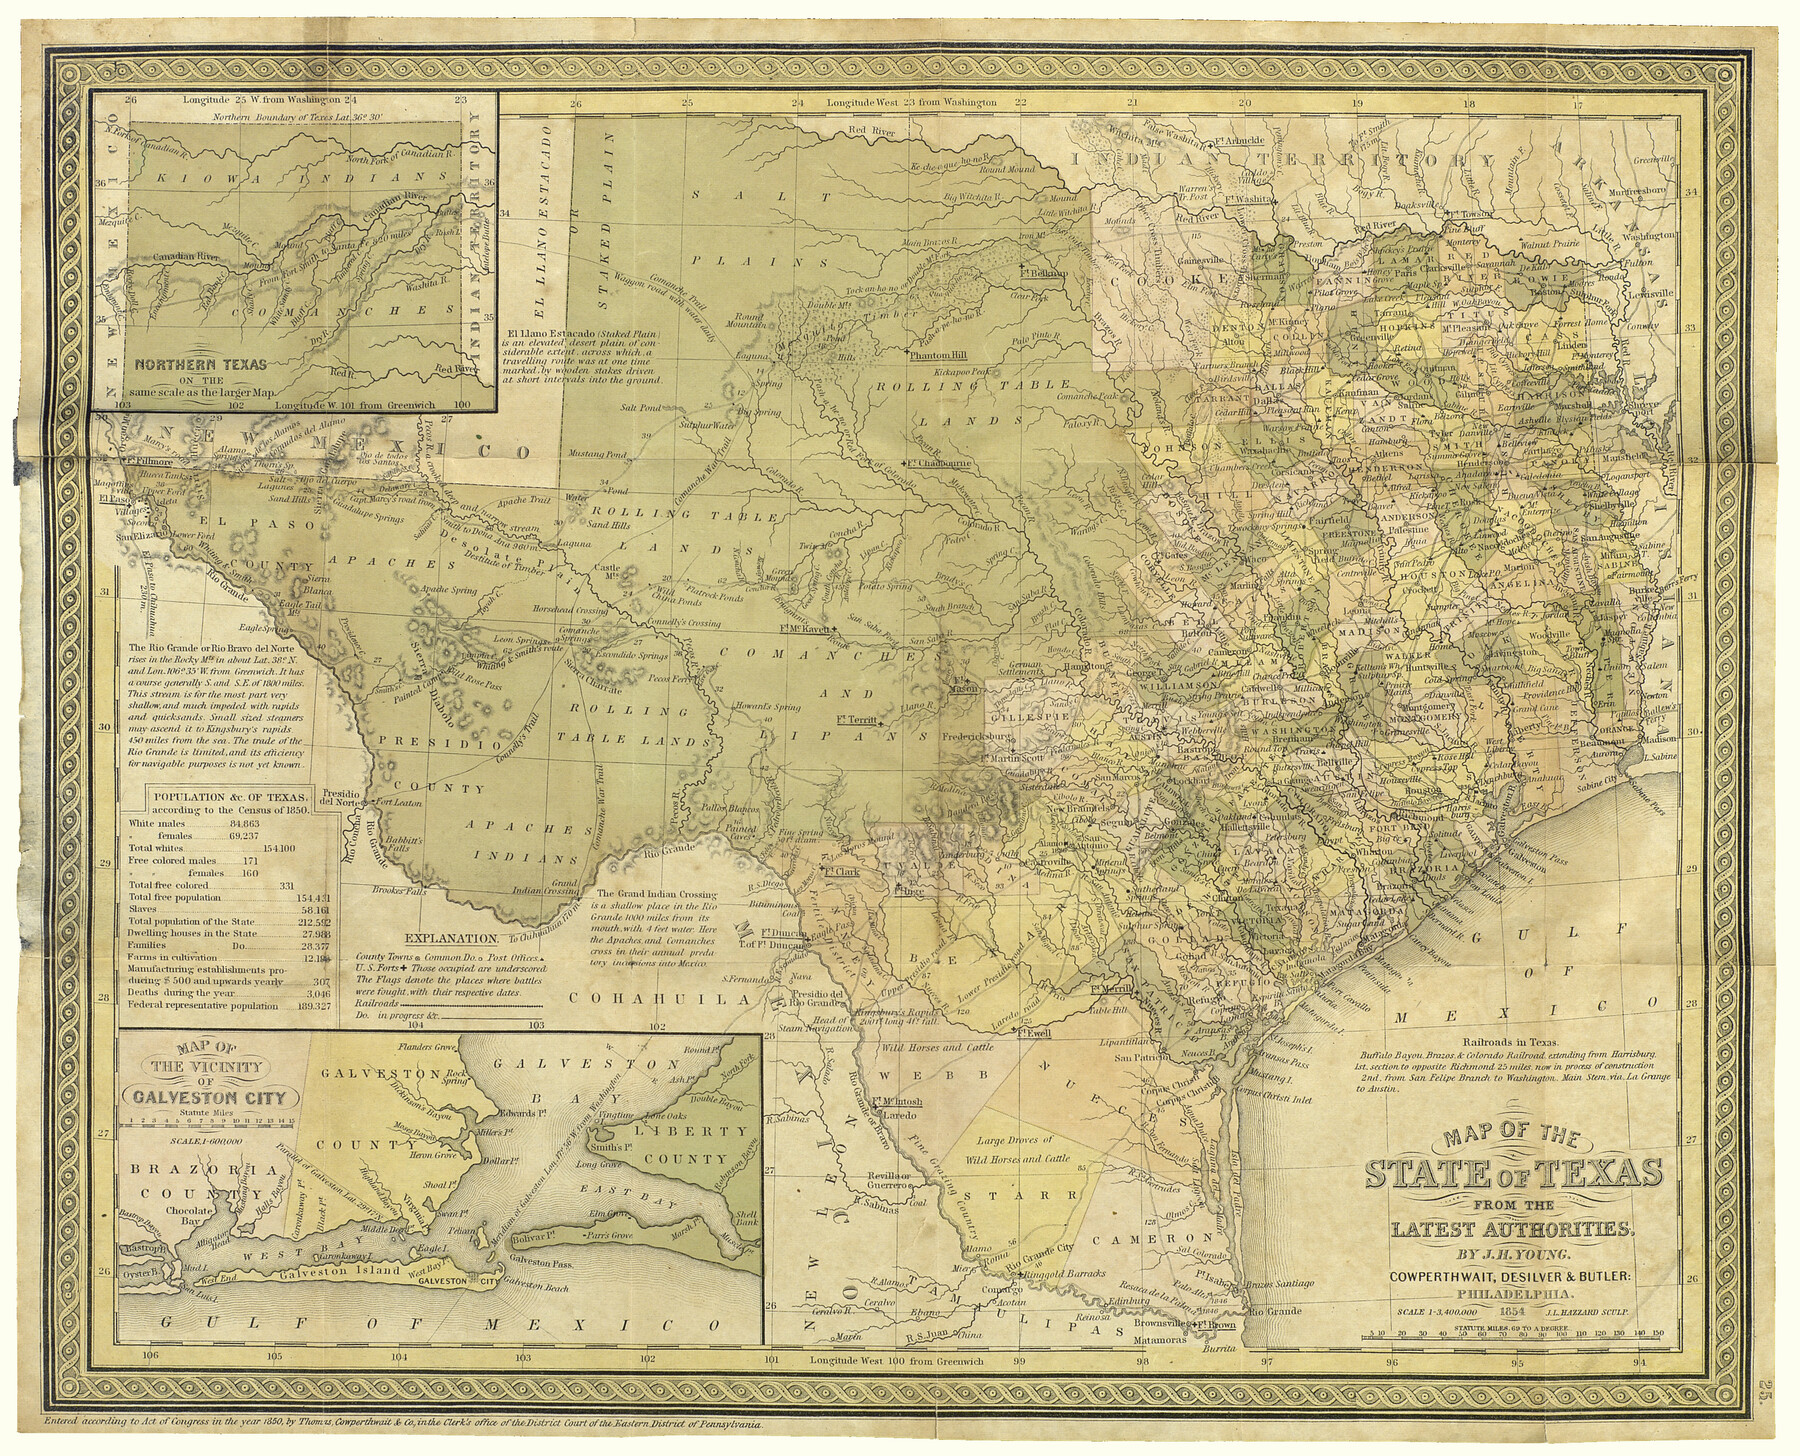 93901, Map of the State of Texas from the Latest Authorities, Holcomb Digital Map Collection